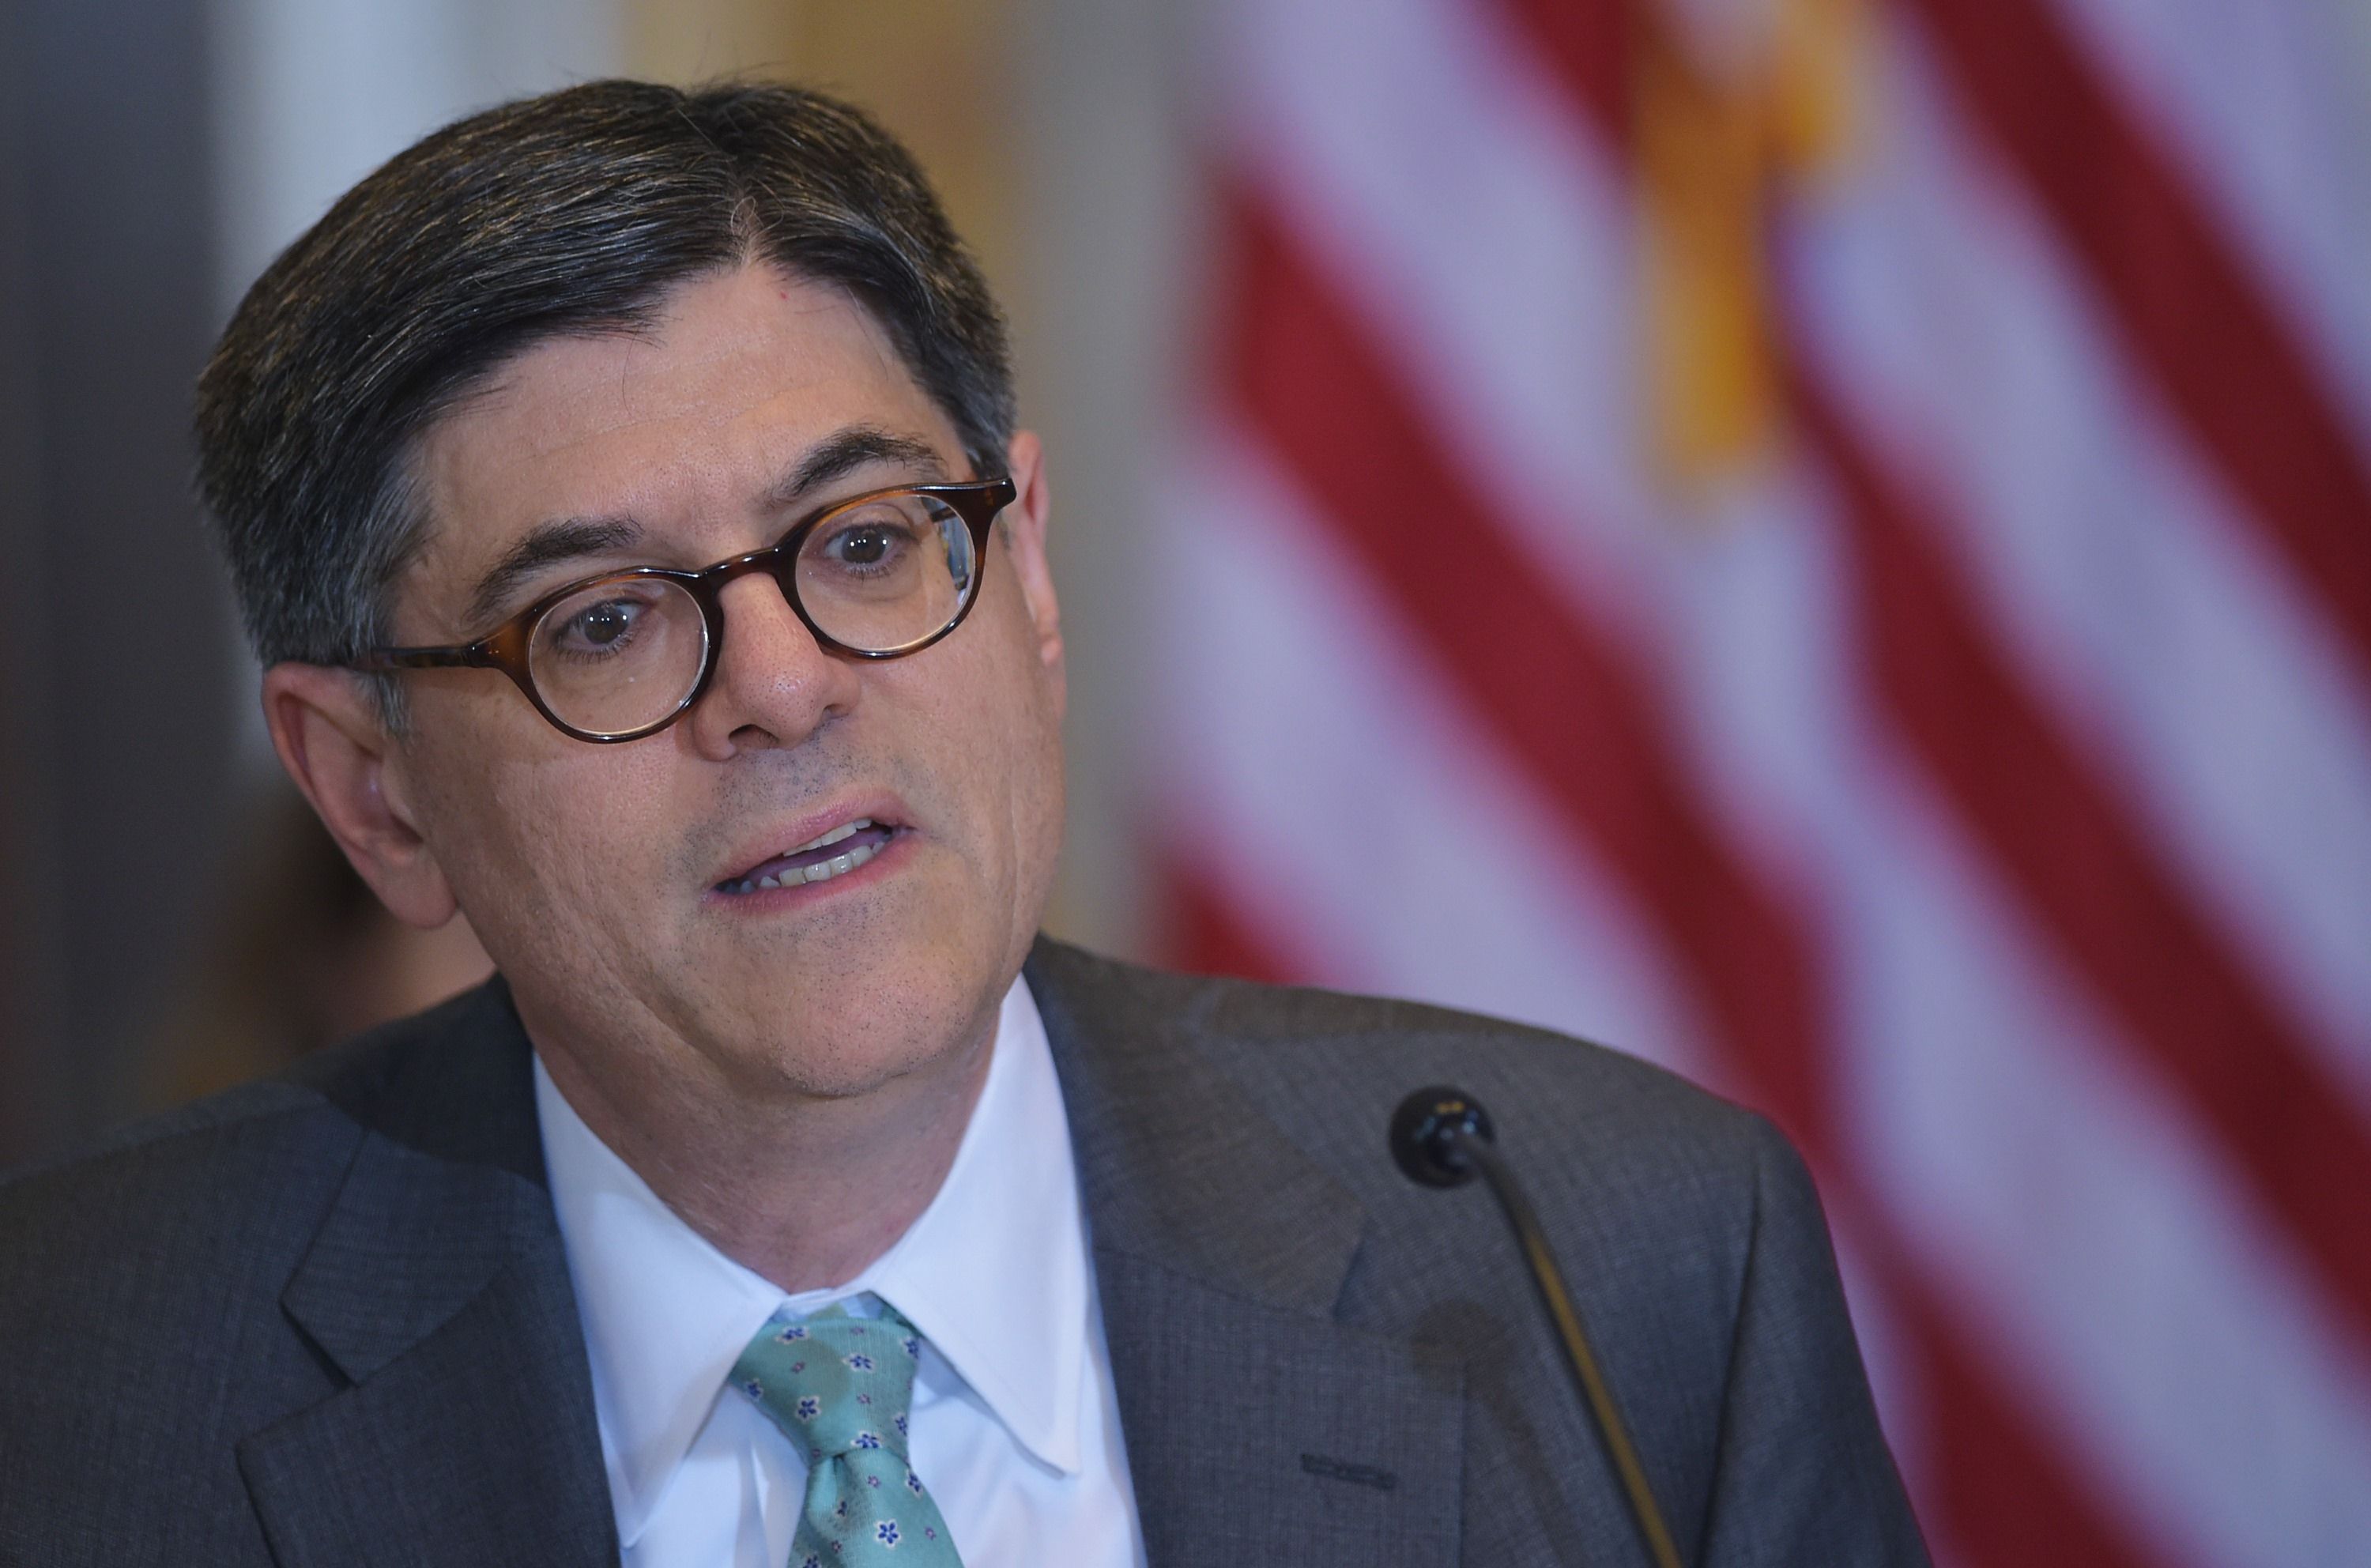 US Treasury Secretary Jacob Lew said China should signal its intentions on exchange rate policy as its decisions had an impact on the world economy. Photo: AFP